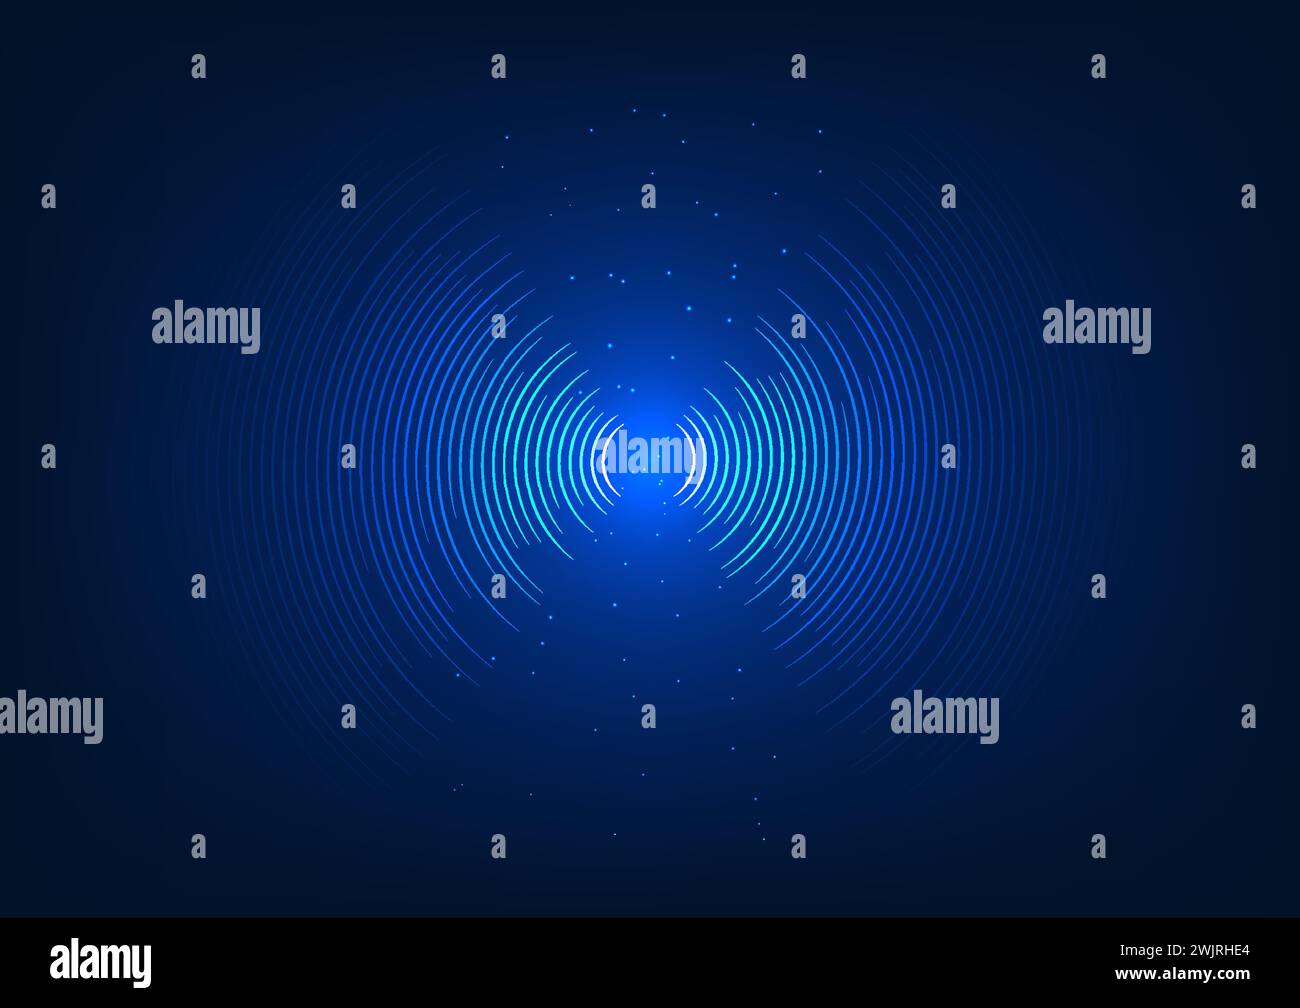 sound wave technology background radiating from the center The concept converts vibrational energy into sound waves that are transmitted. Stock Vector